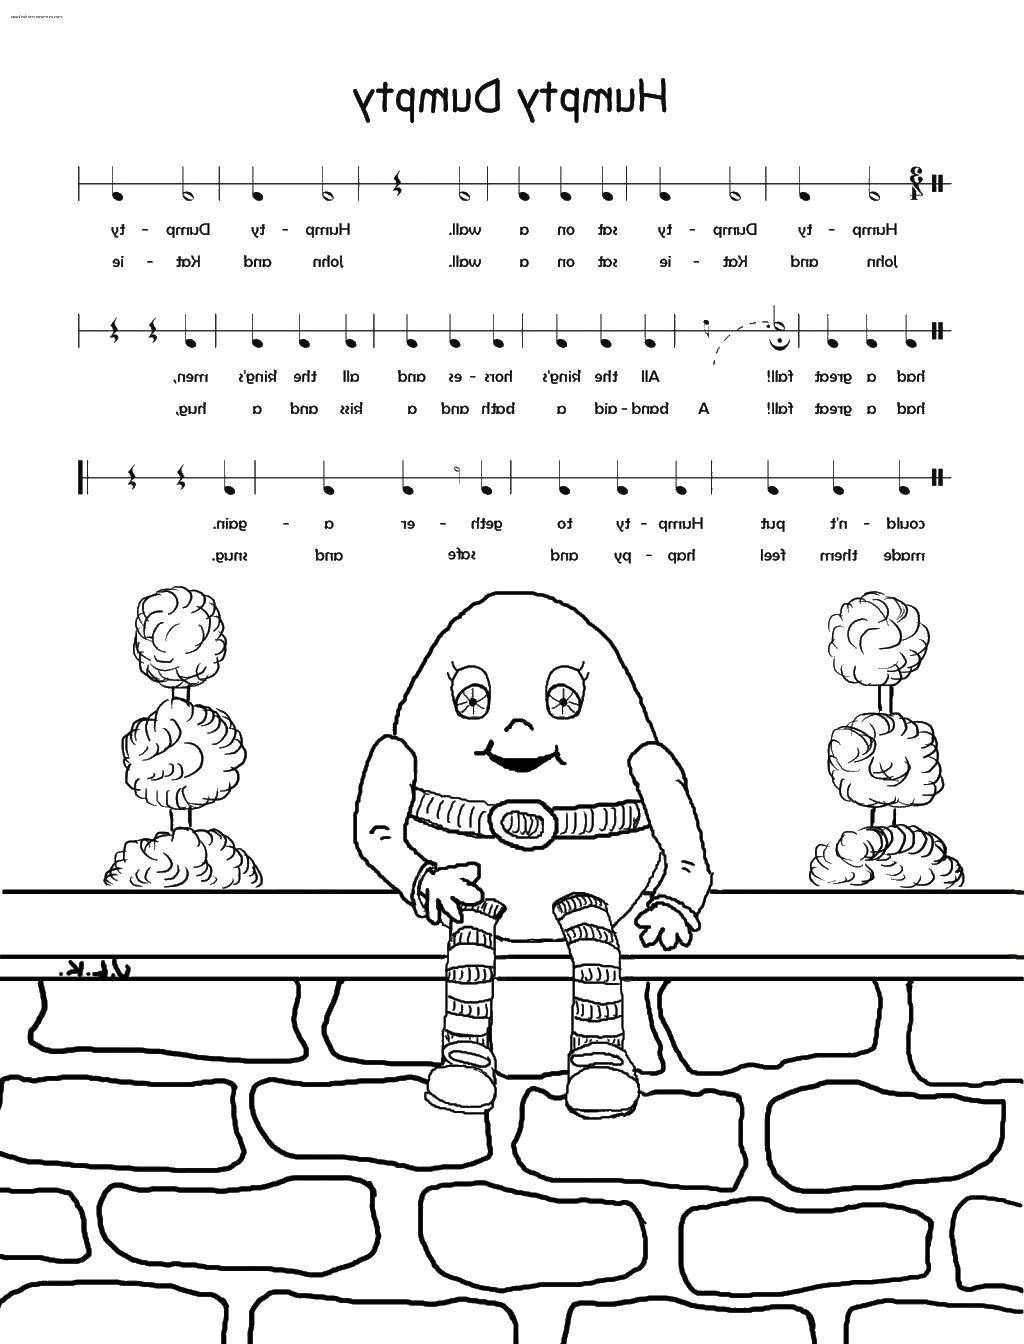 Coloring Humpty Baltay. Category Music. Tags:  Humpty Baltay, music, song.